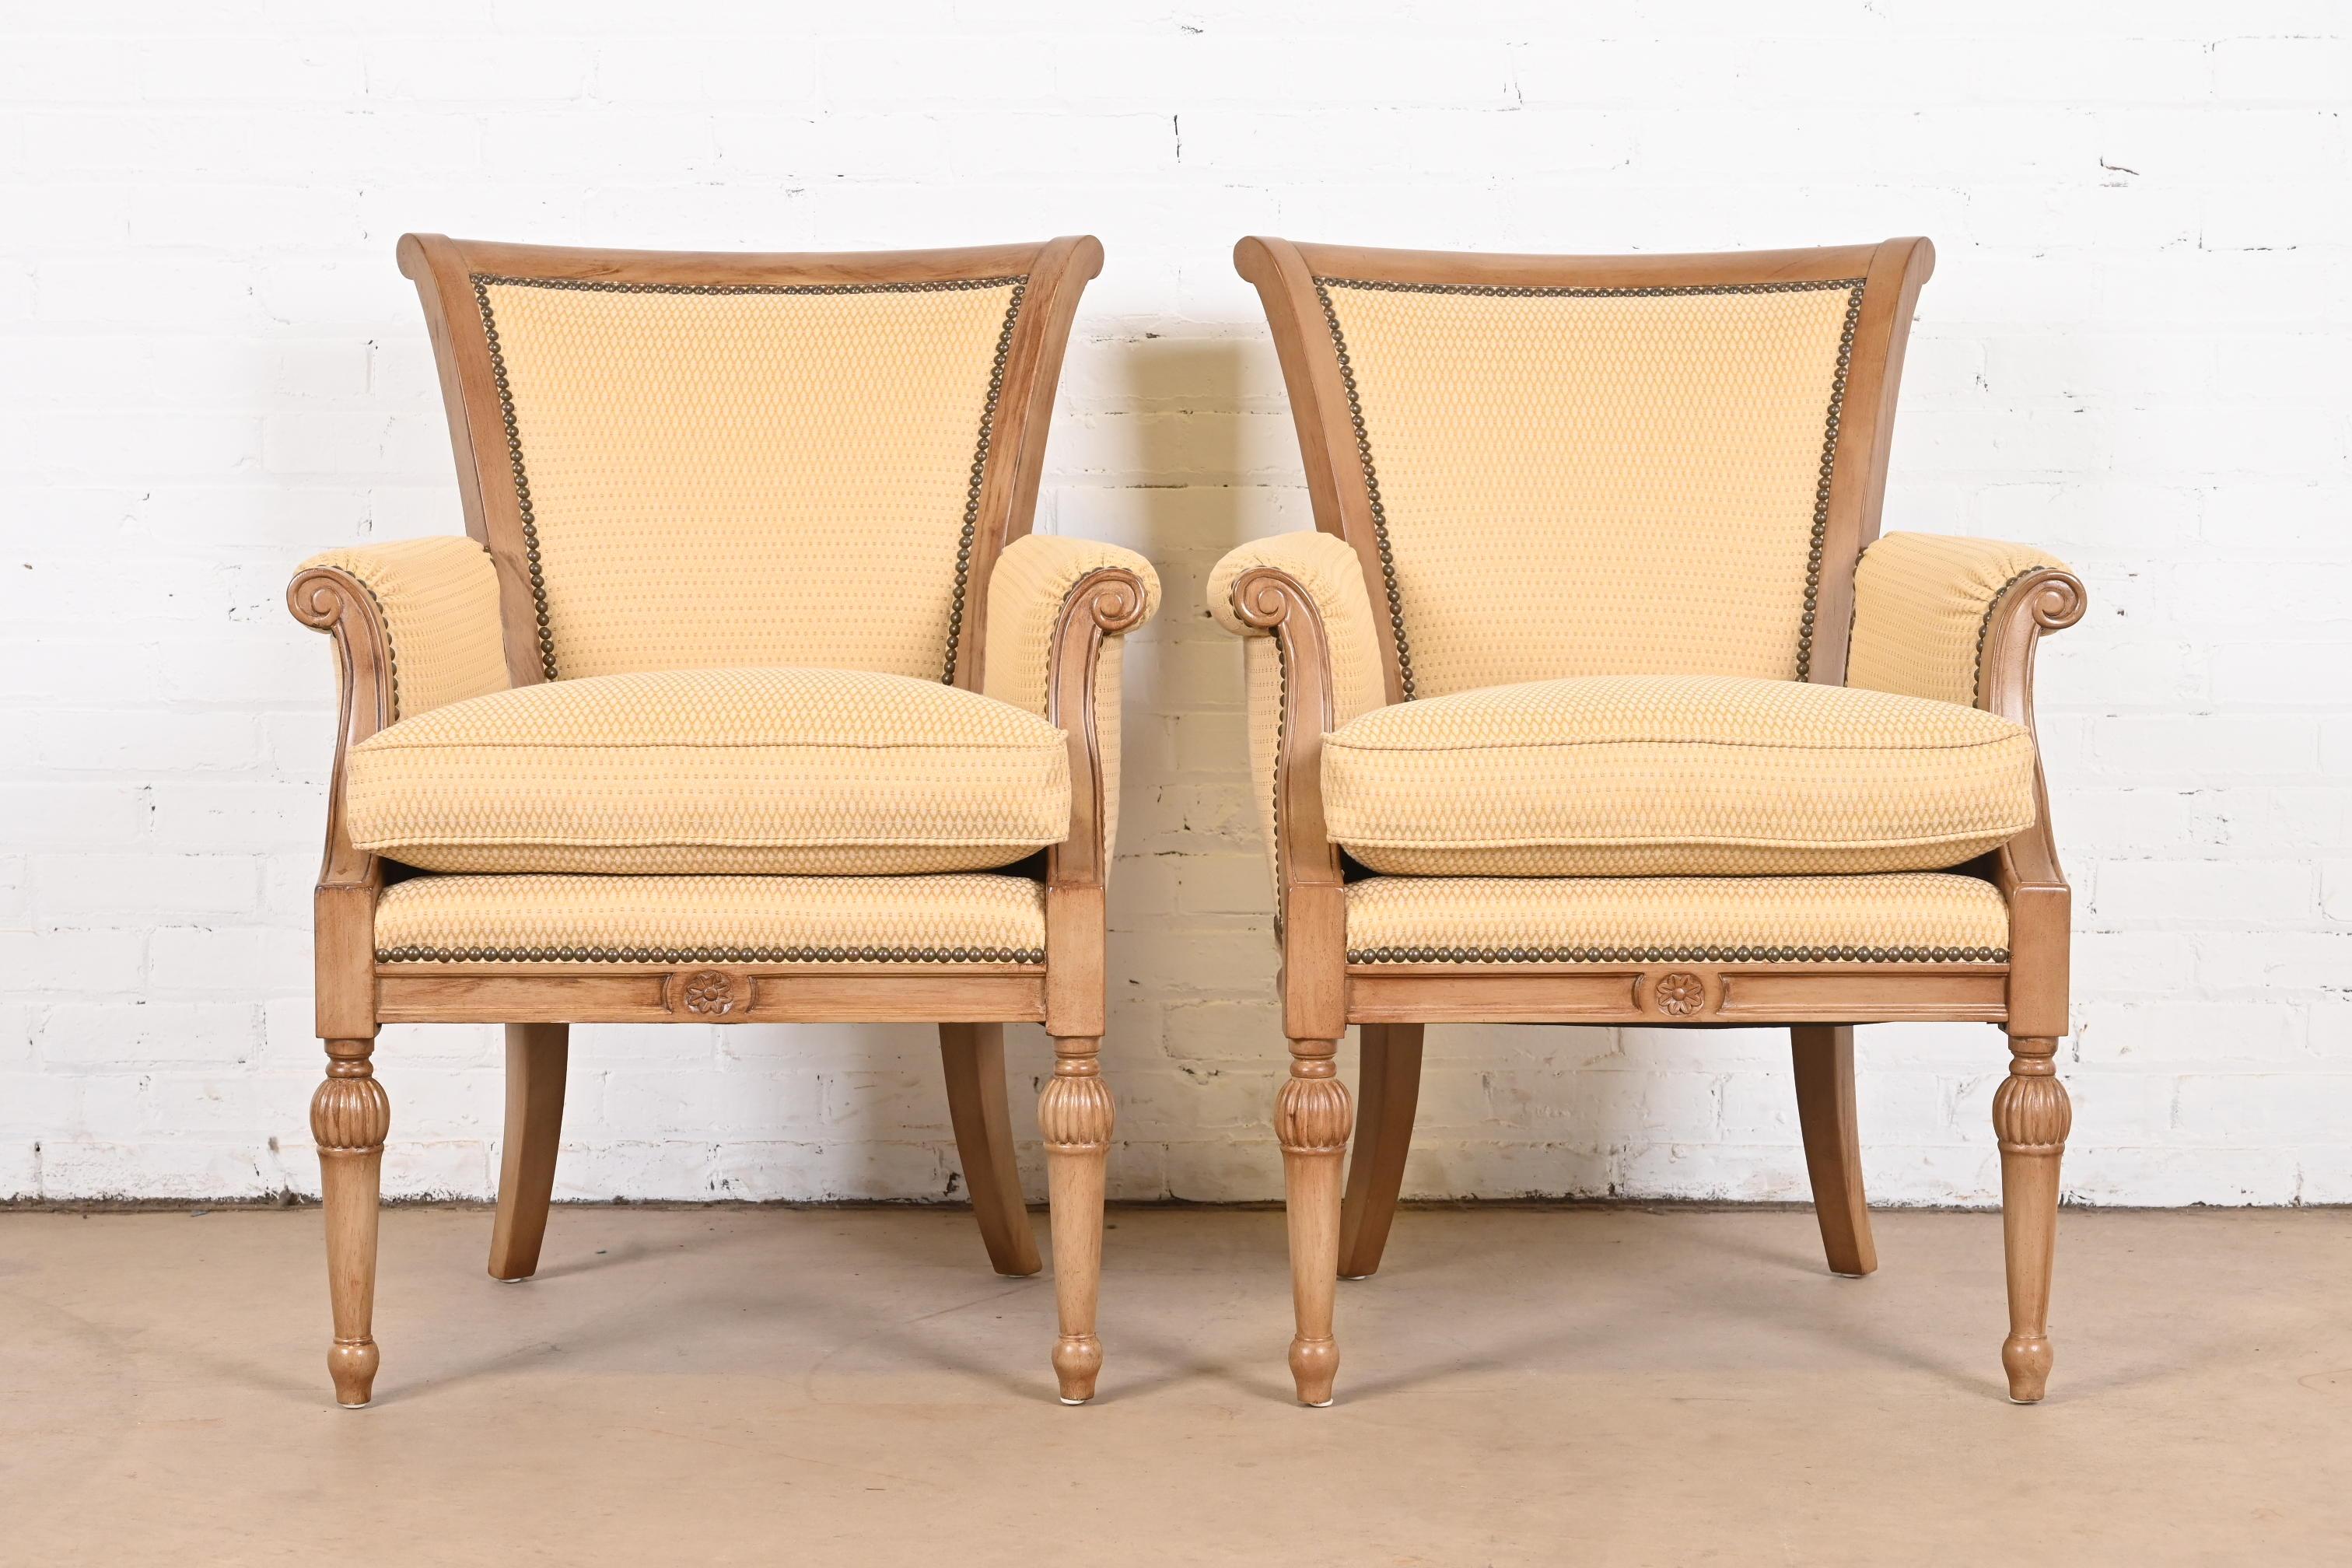 Barbara Barry for Henredon French Regency Louis XVI Bergere Chairs, Pair In Good Condition For Sale In South Bend, IN